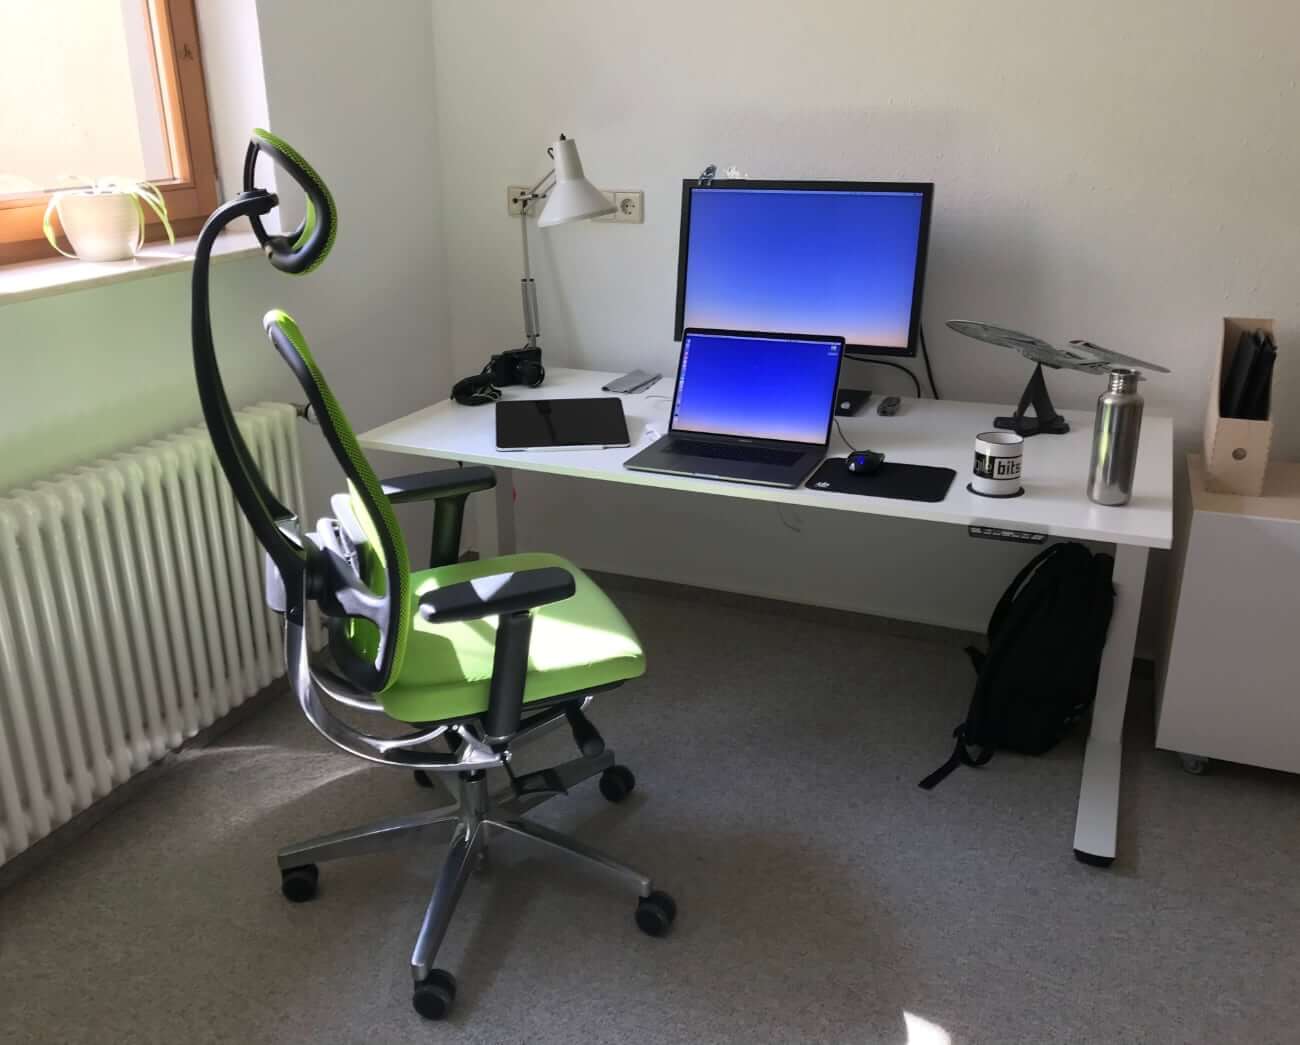 Image of Alex's work from home setup